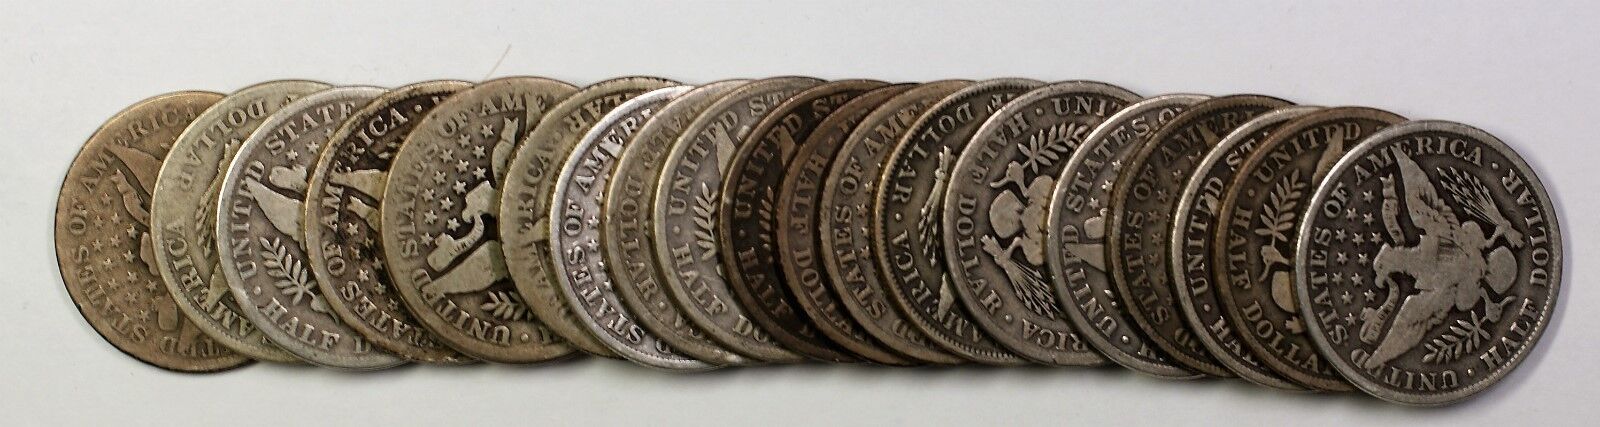 1904 Barber Half Dollar 50c Roll 20 Circulated 90% Old Silver Coins Lot